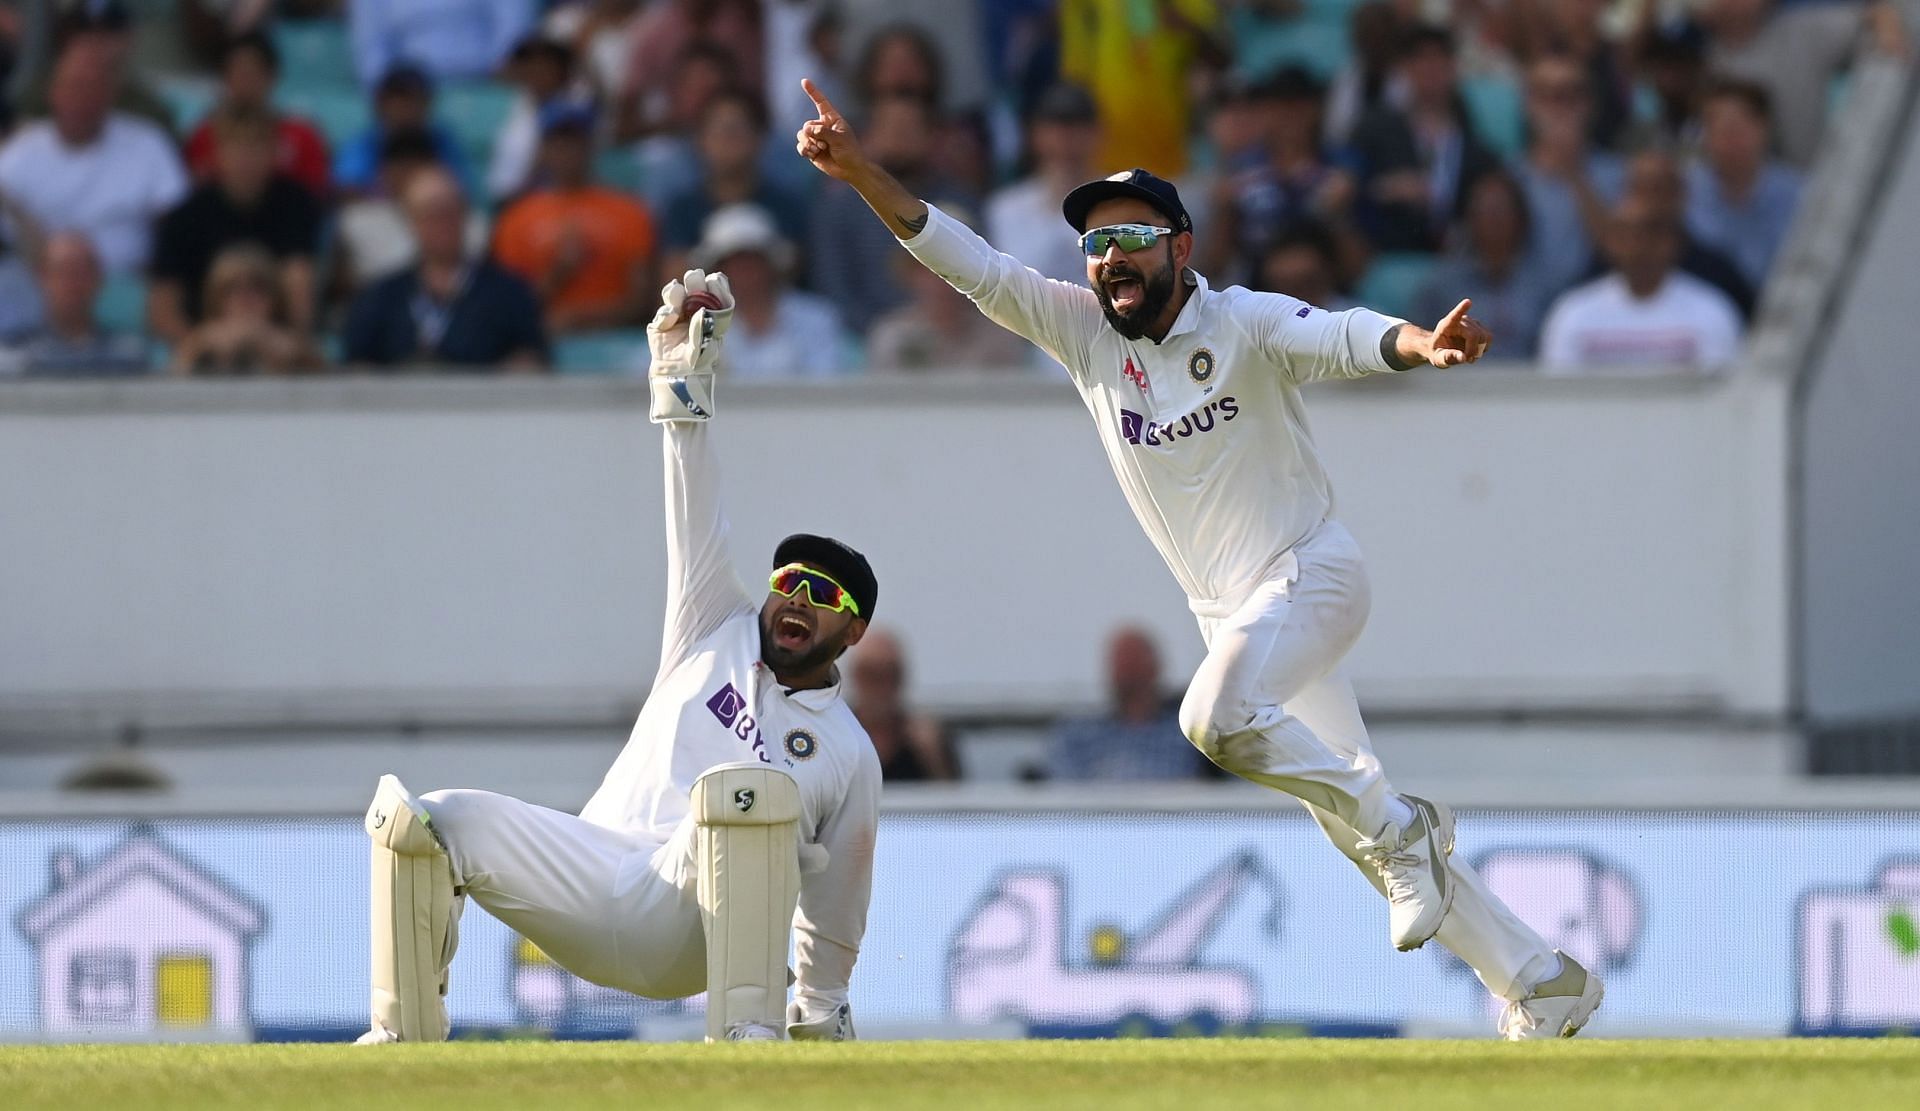 Rishabh and Virat Kohli recently played for India in an ICC World Test Championship match against England.